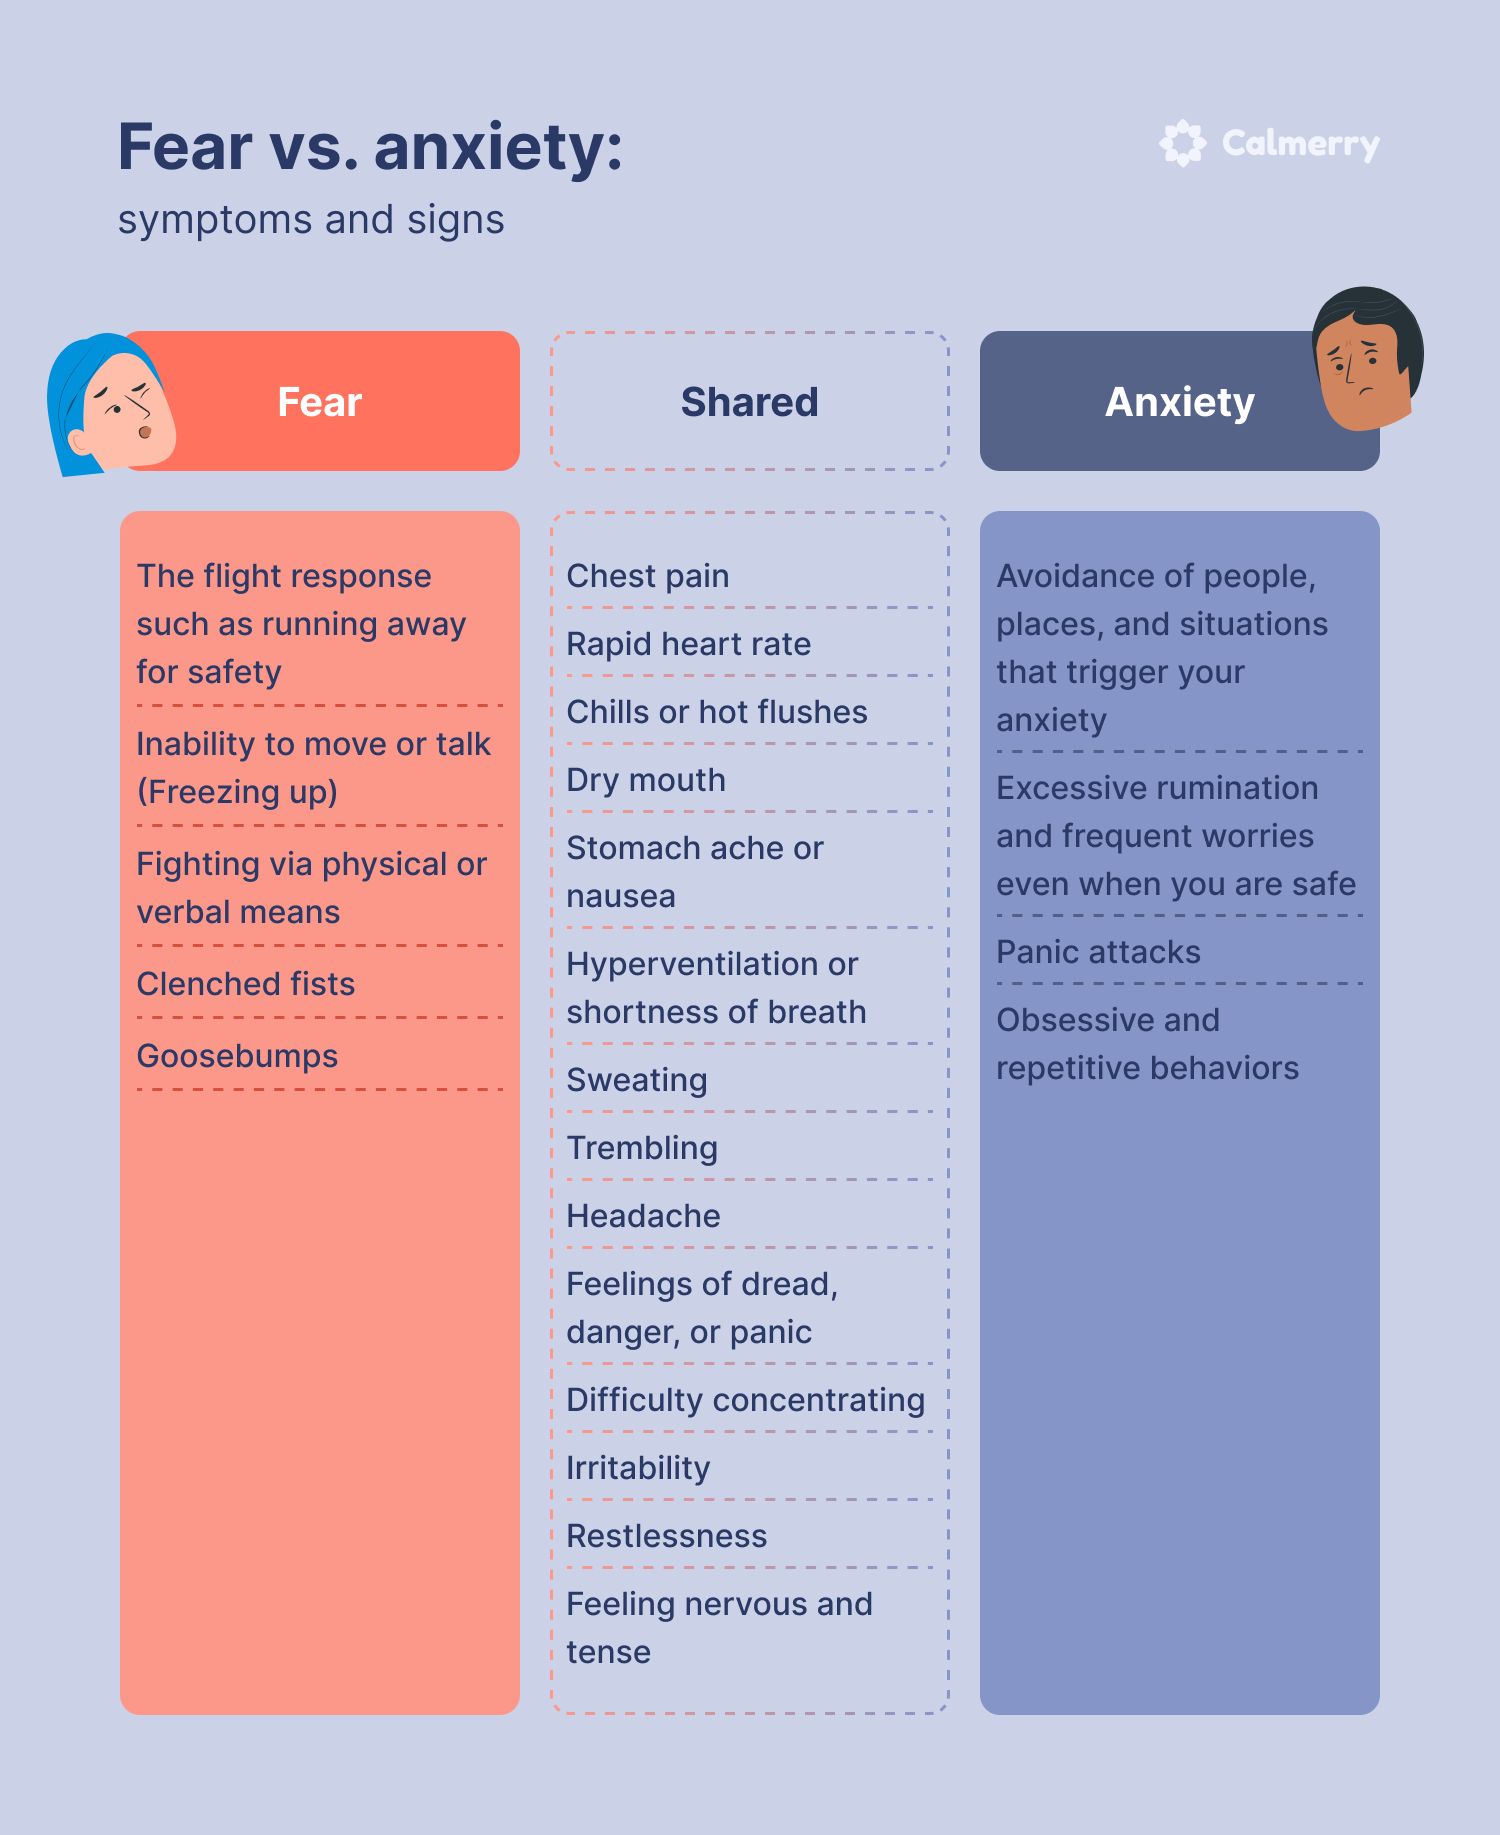 The image displays a comparison titled "Fear vs. anxiety: symptoms and signs" with the "Calmerry" logo in the top right corner. It has three columns, each with a distinct color and a graphic of a person's head to symbolize the emotion.

The left column, in red, labeled "Fear," lists symptoms associated with fear:

The flight response such as running away for safety
Inability to move or talk (Freezing up)
Fighting via physical or verbal means
Clenched fists
Goosebumps
The middle column, in gray, labeled "Shared," lists symptoms common to both fear and anxiety:

Chest pain
Rapid heart rate
Chills or hot flashes
Dry mouth
Stomach ache or nausea
Hyperventilation or shortness of breath
Sweating
Trembling
Headache
Feelings of dread, danger, or panic
The right column, in blue, labeled "Anxiety," lists symptoms associated with anxiety:

Avoidance of people, places, and situations that trigger your anxiety
Excessive rumination and frequent worries even when you are safe
Panic attacks
Obsessive and repetitive behaviors